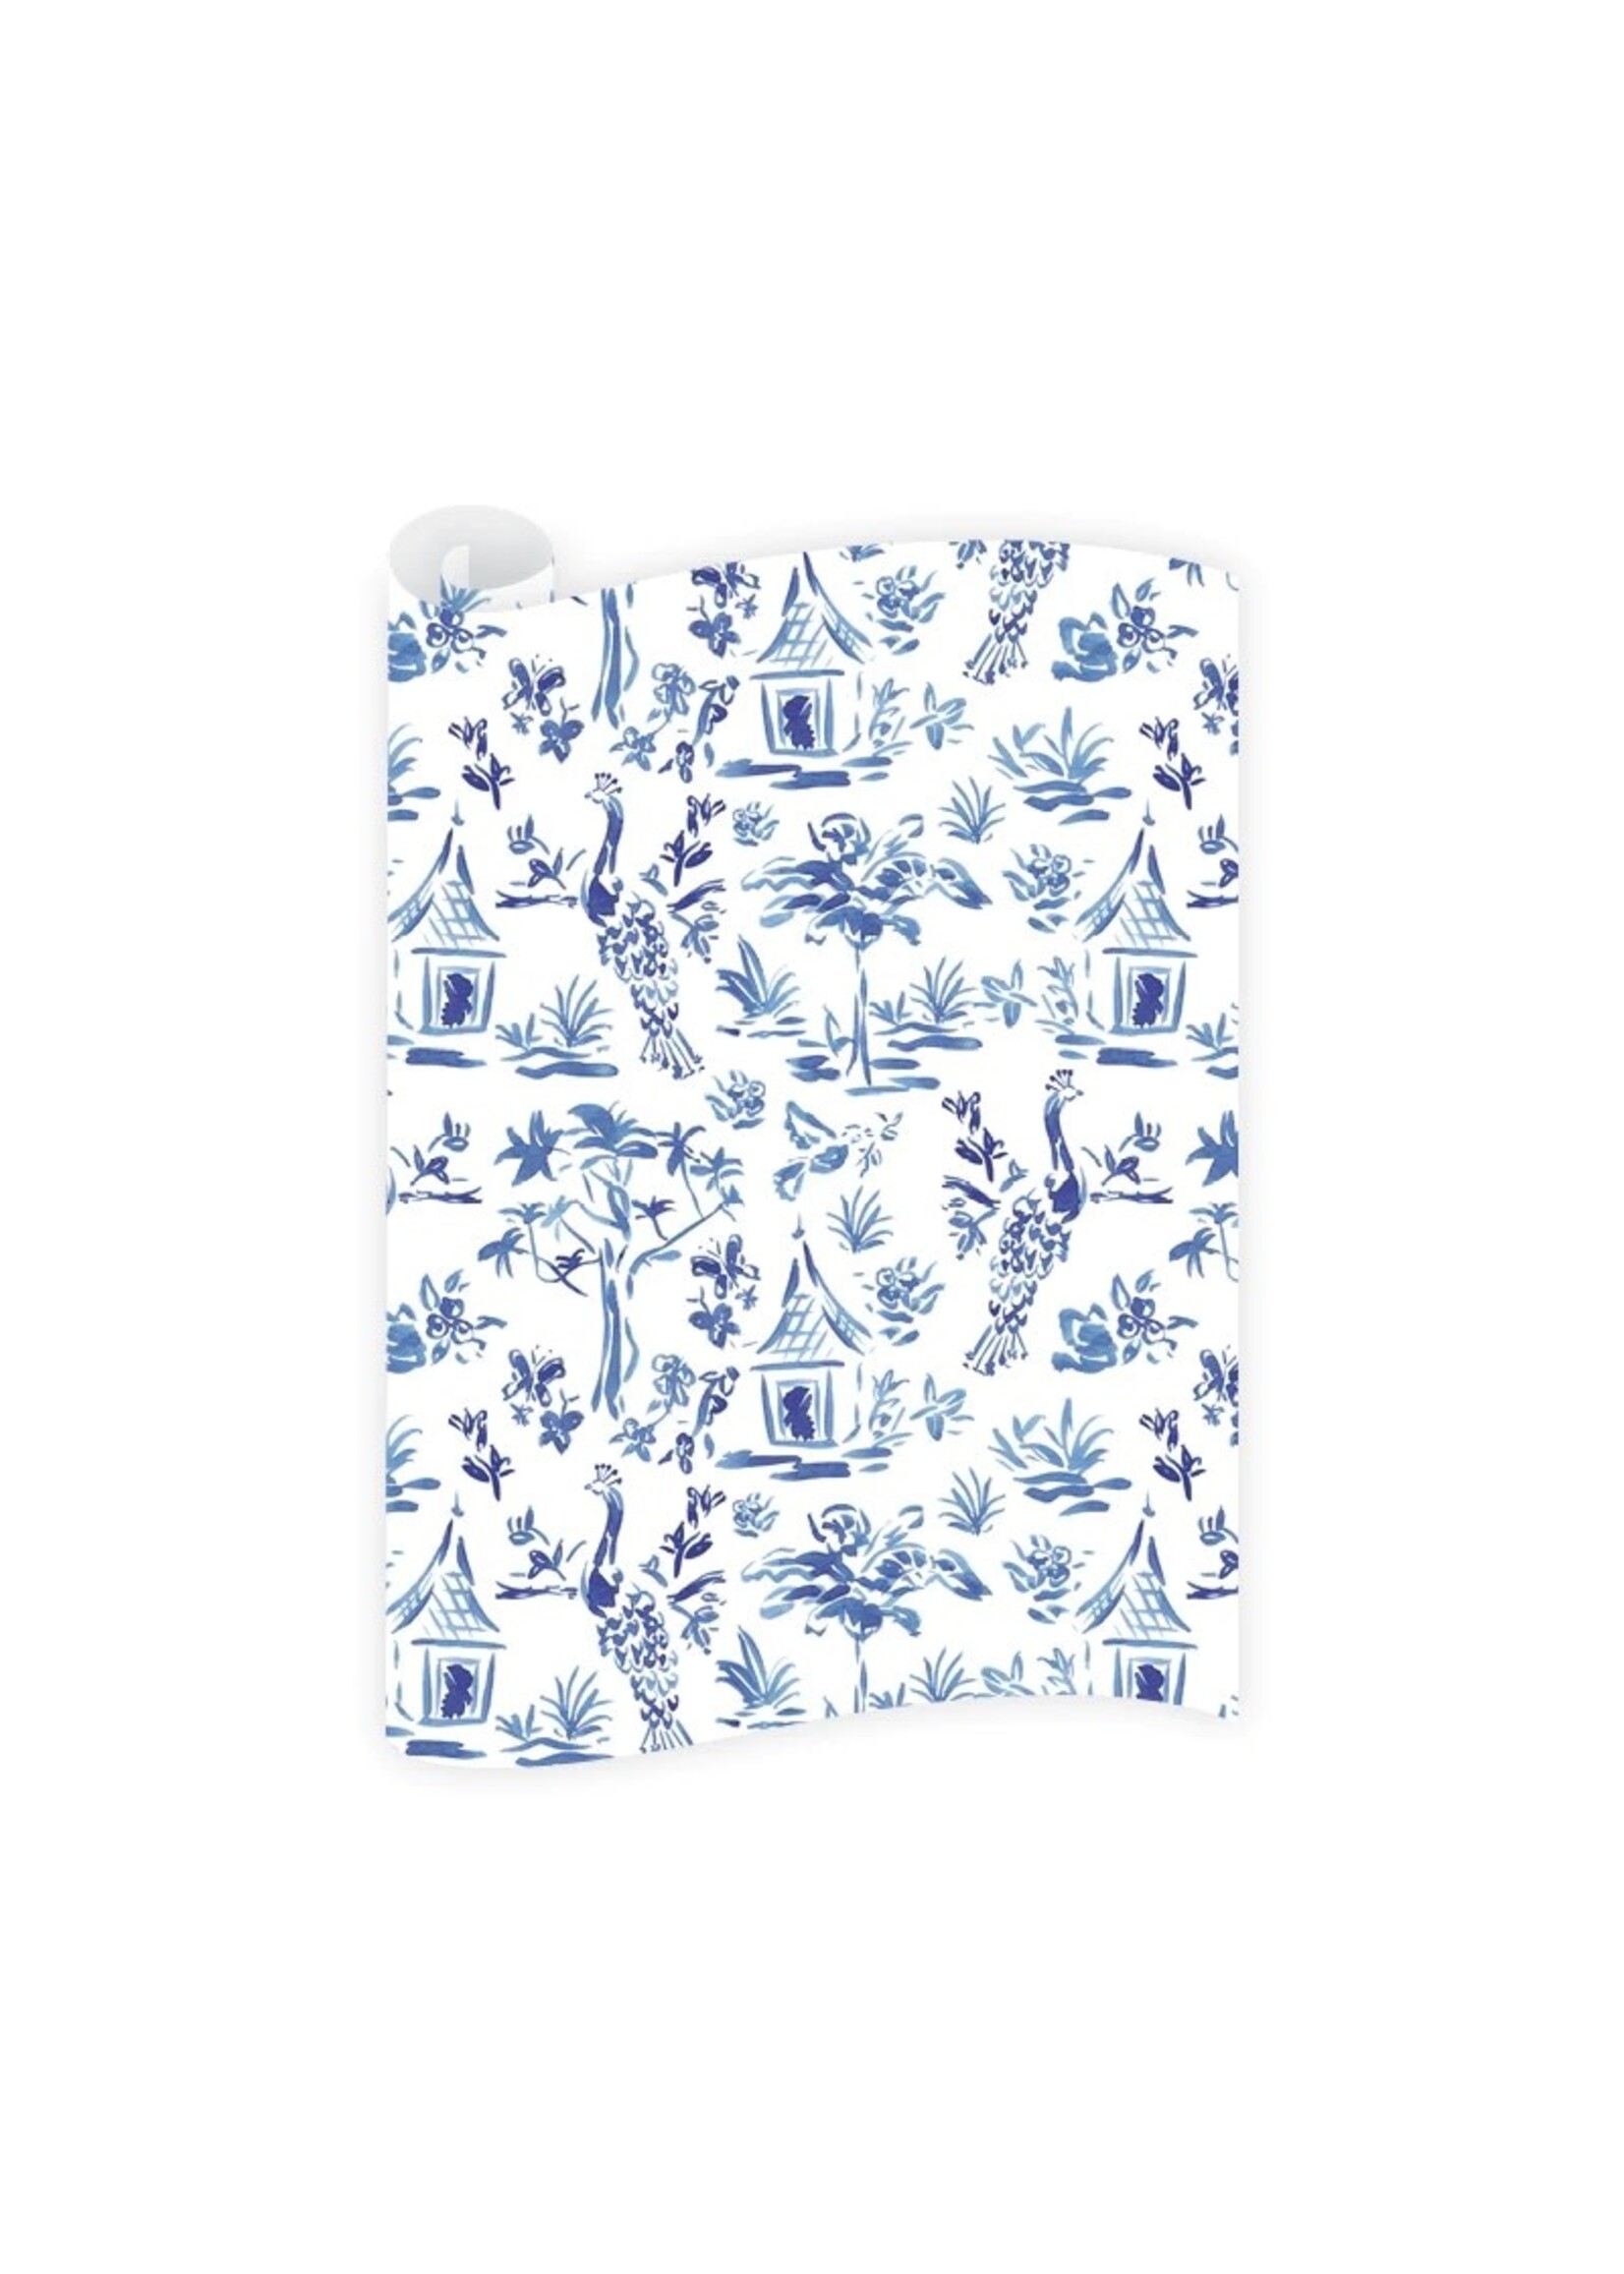 Dogwood Hill Gift Wrap Sheets - Blue Toile (3 sheets)